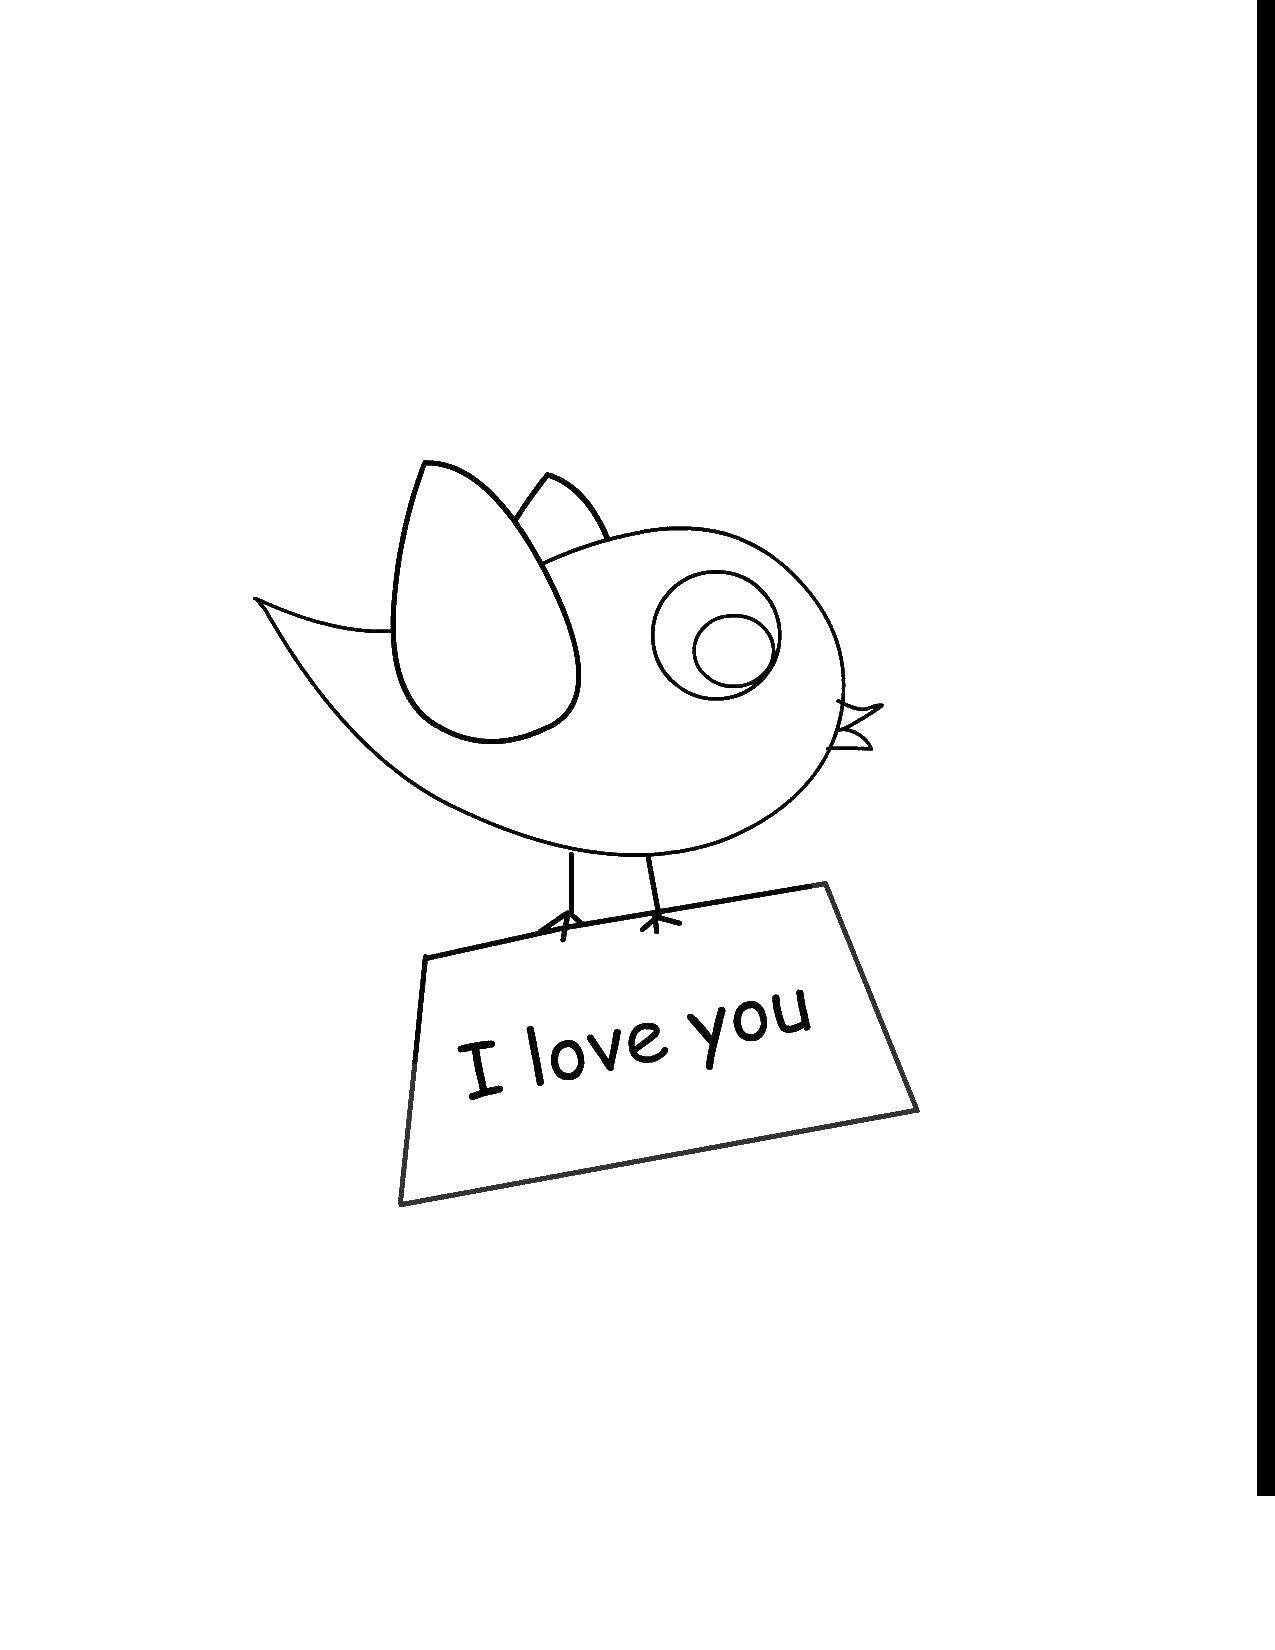 Coloring Bird with letter. Category birds. Tags:  birds.